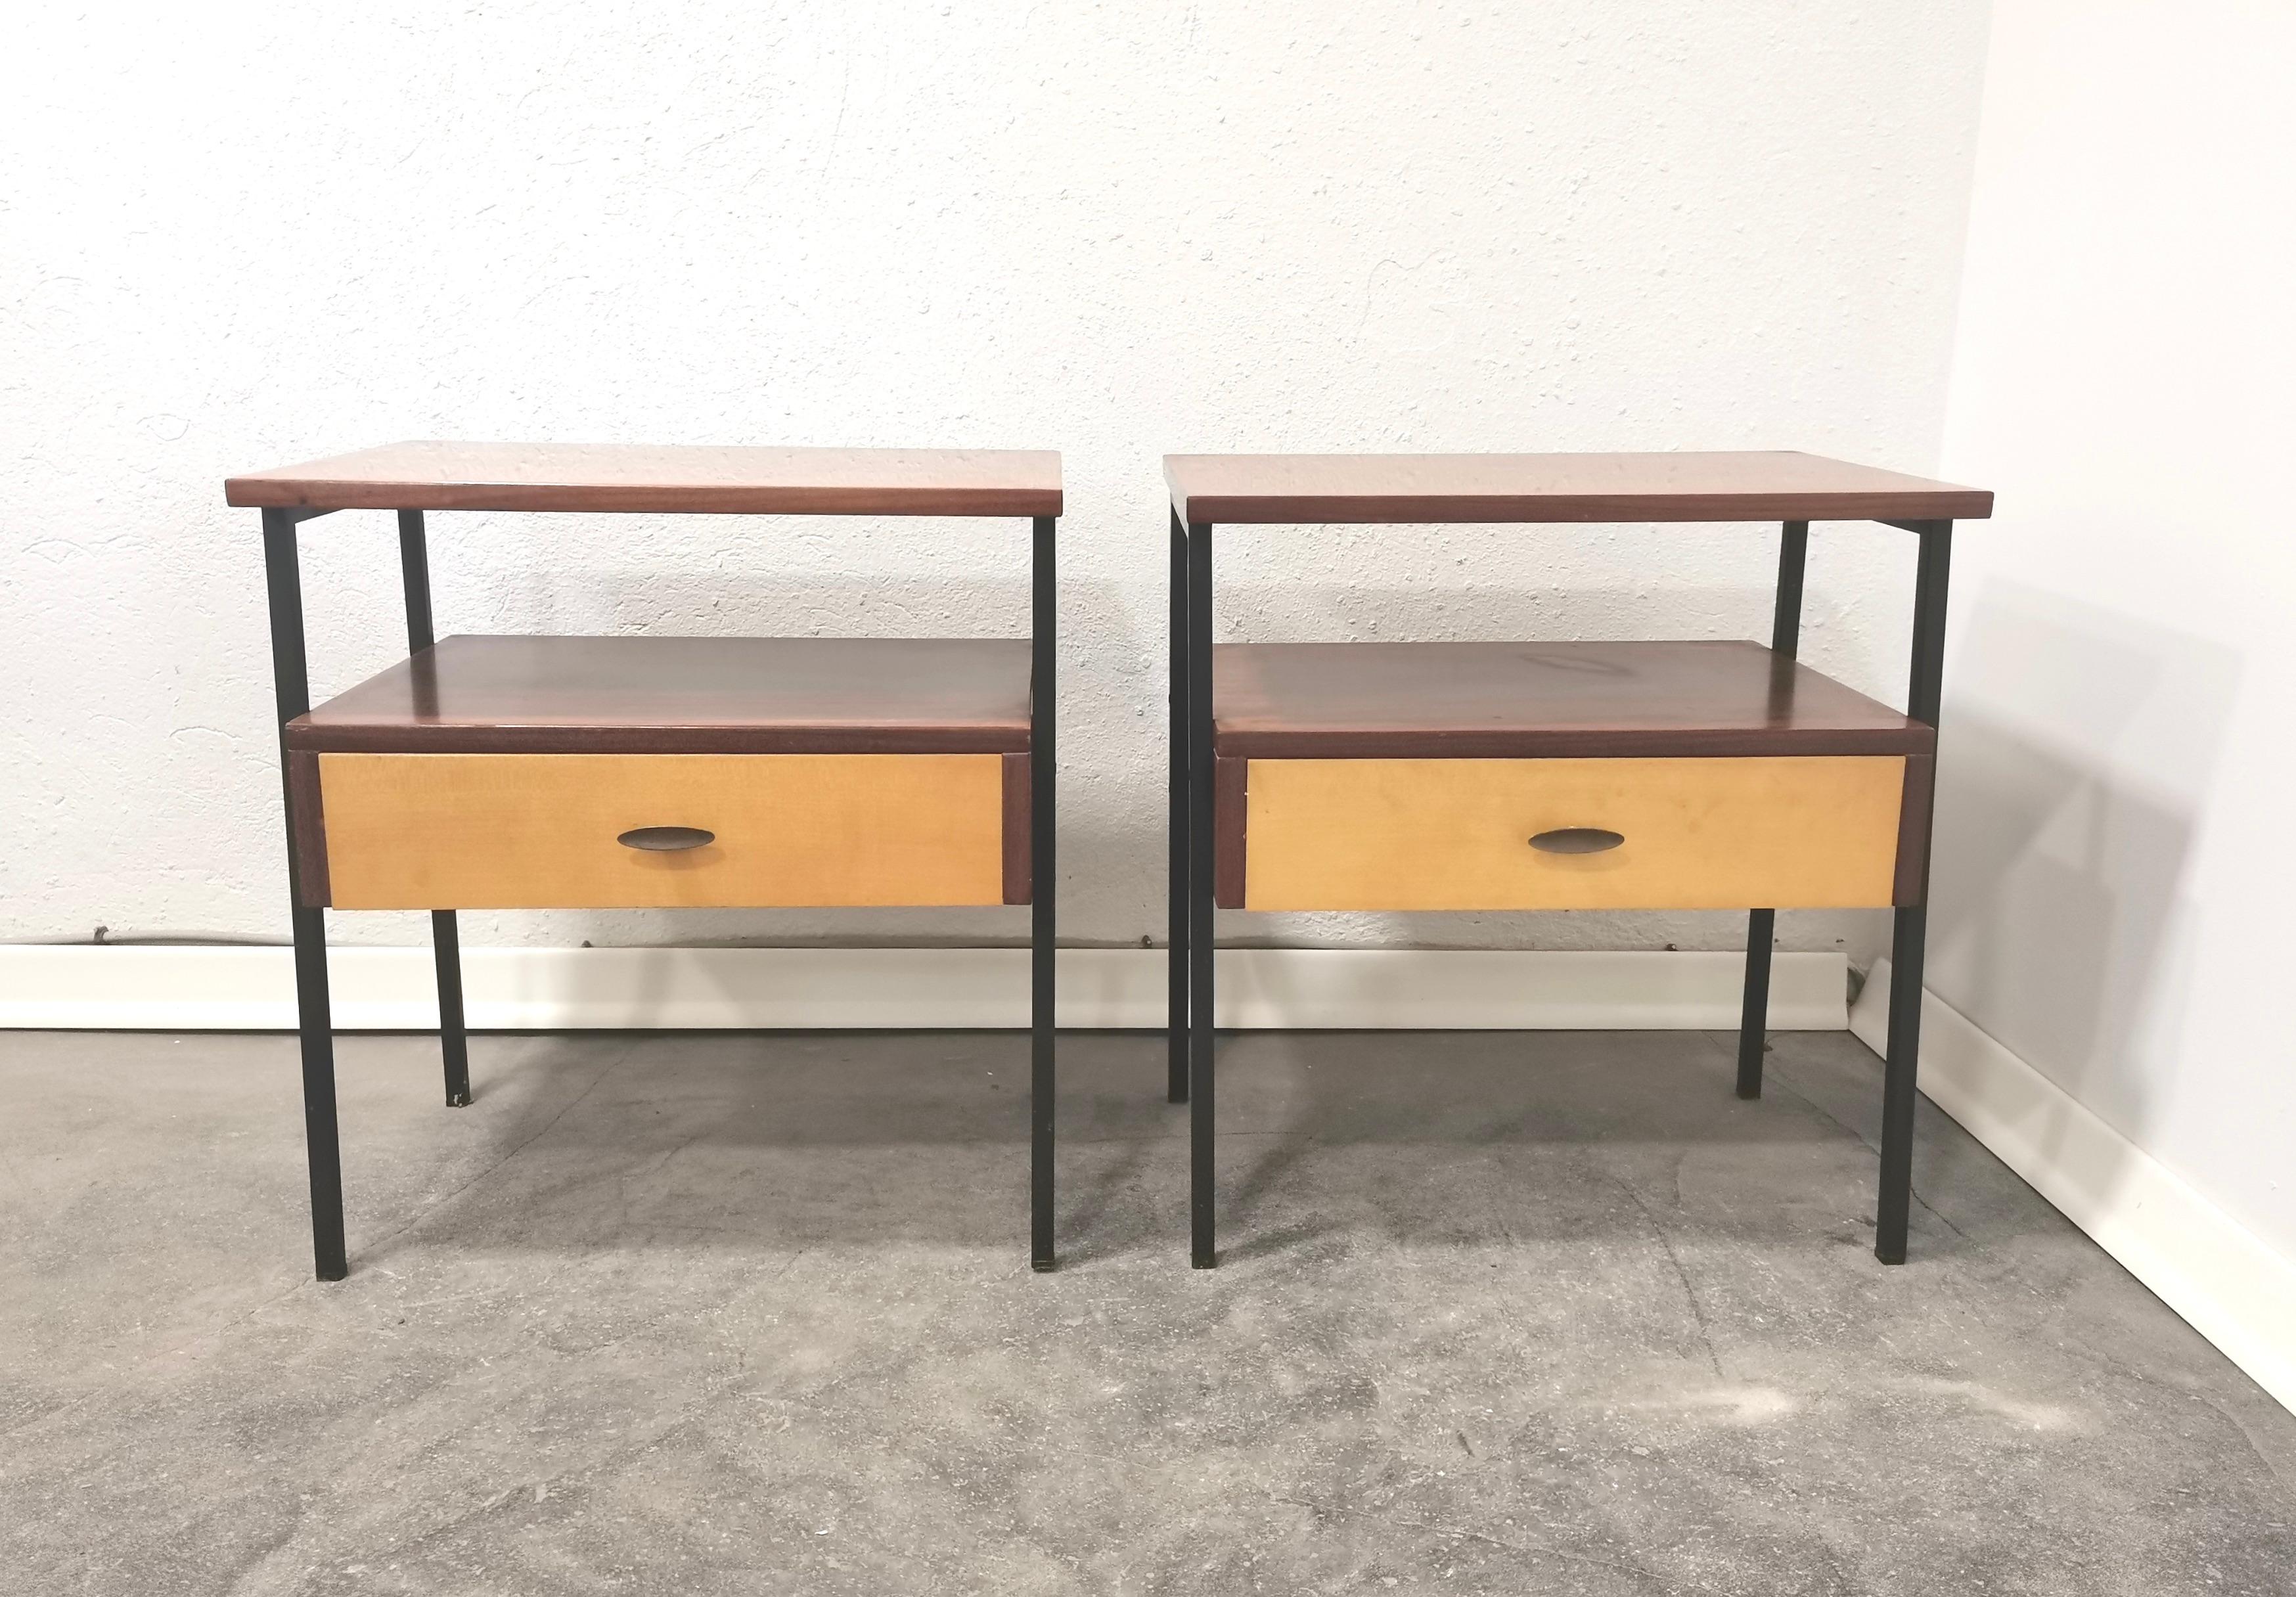 Pair of nightstands/bedside tables
This pair of italian bedside tables reflects modest but conteporary aesthetic. Practicality and perfect form in one pair of beautiful nightstands. 

Material: wood, plywood, furnished, metal

Period: 1970s

Style: